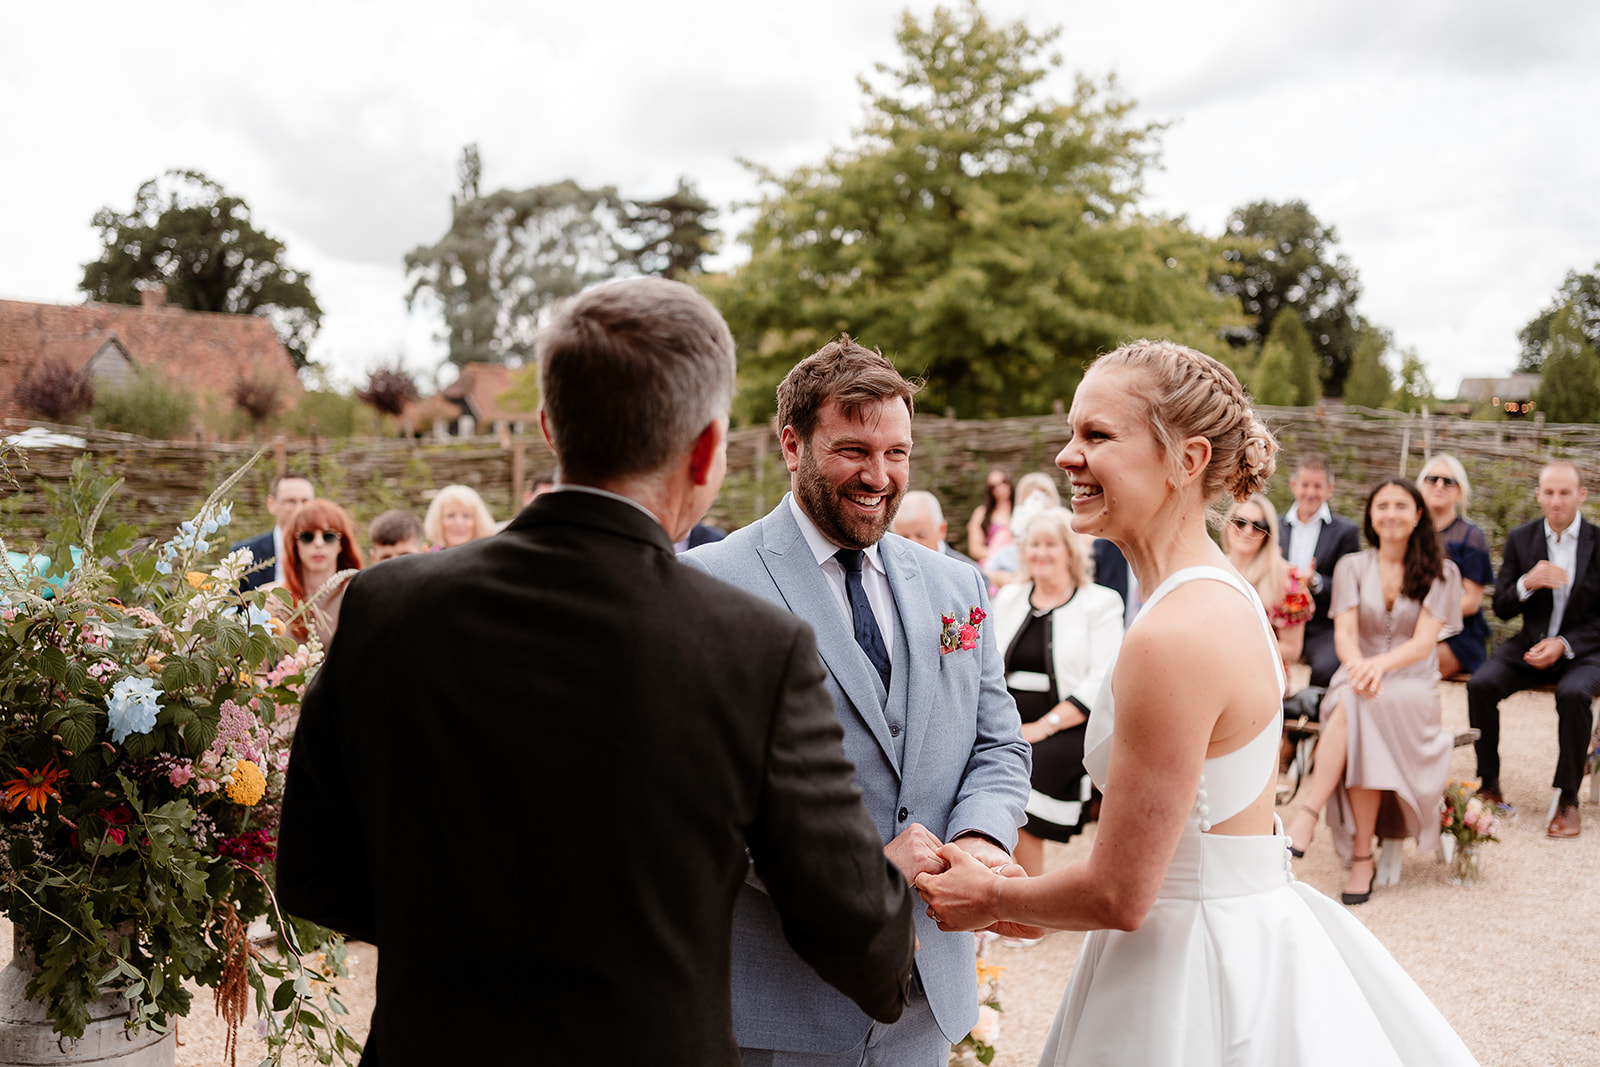 Bride and groom laugh together during their outdoor ceremony at a summer wedding at Silchester Farm